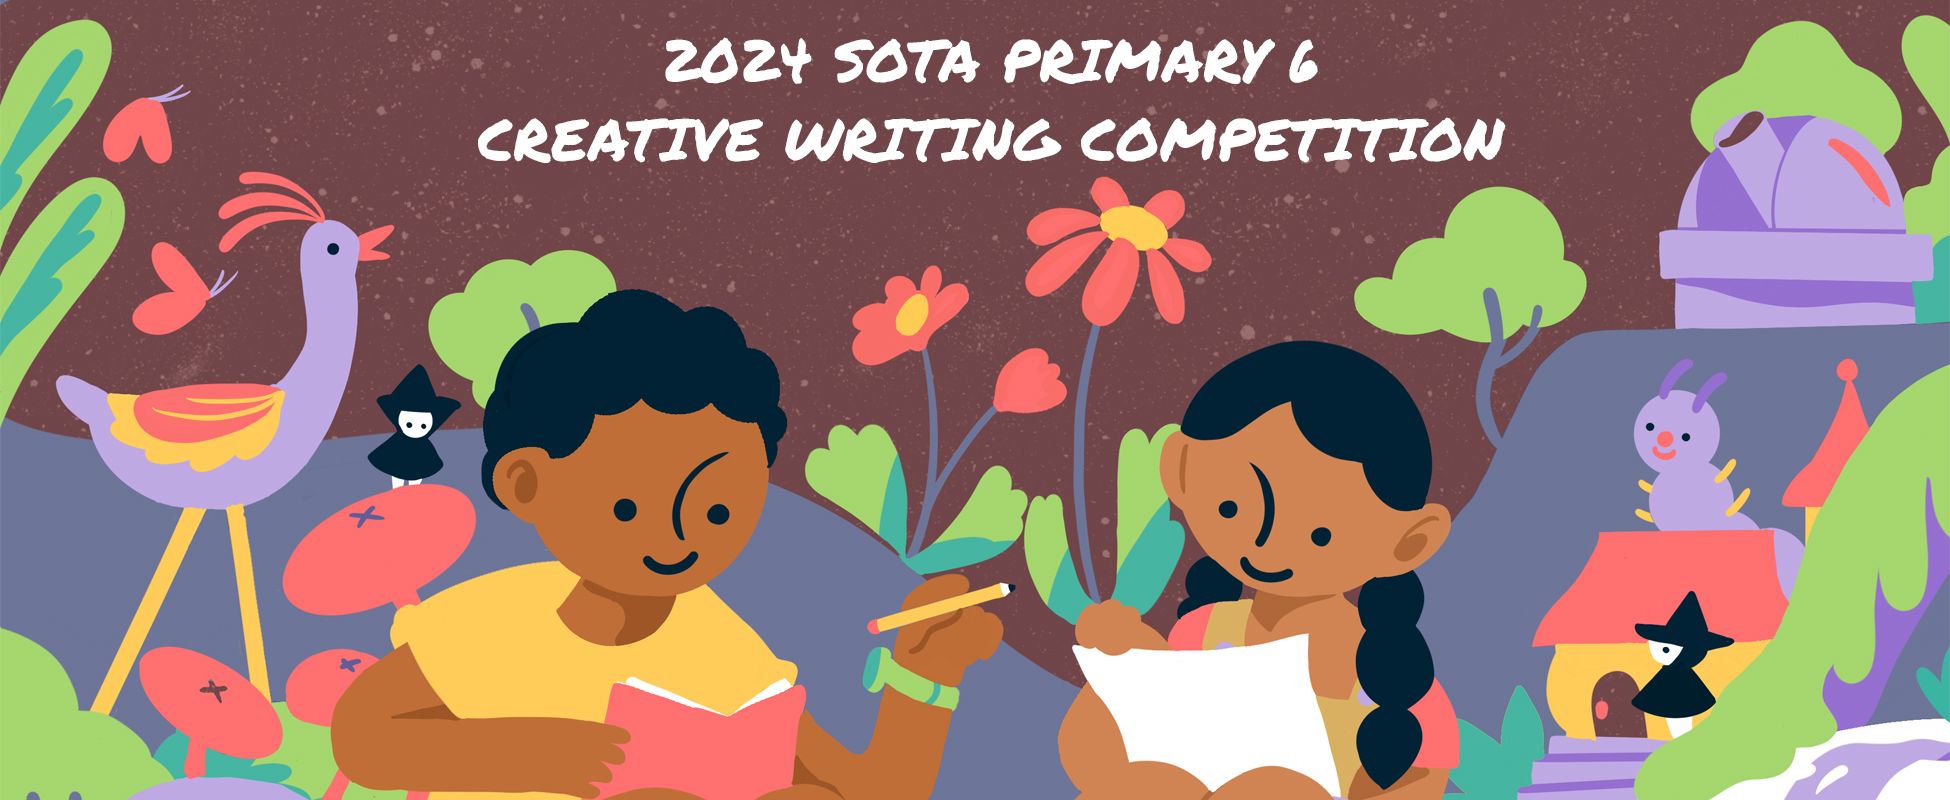 creative writing beta competition